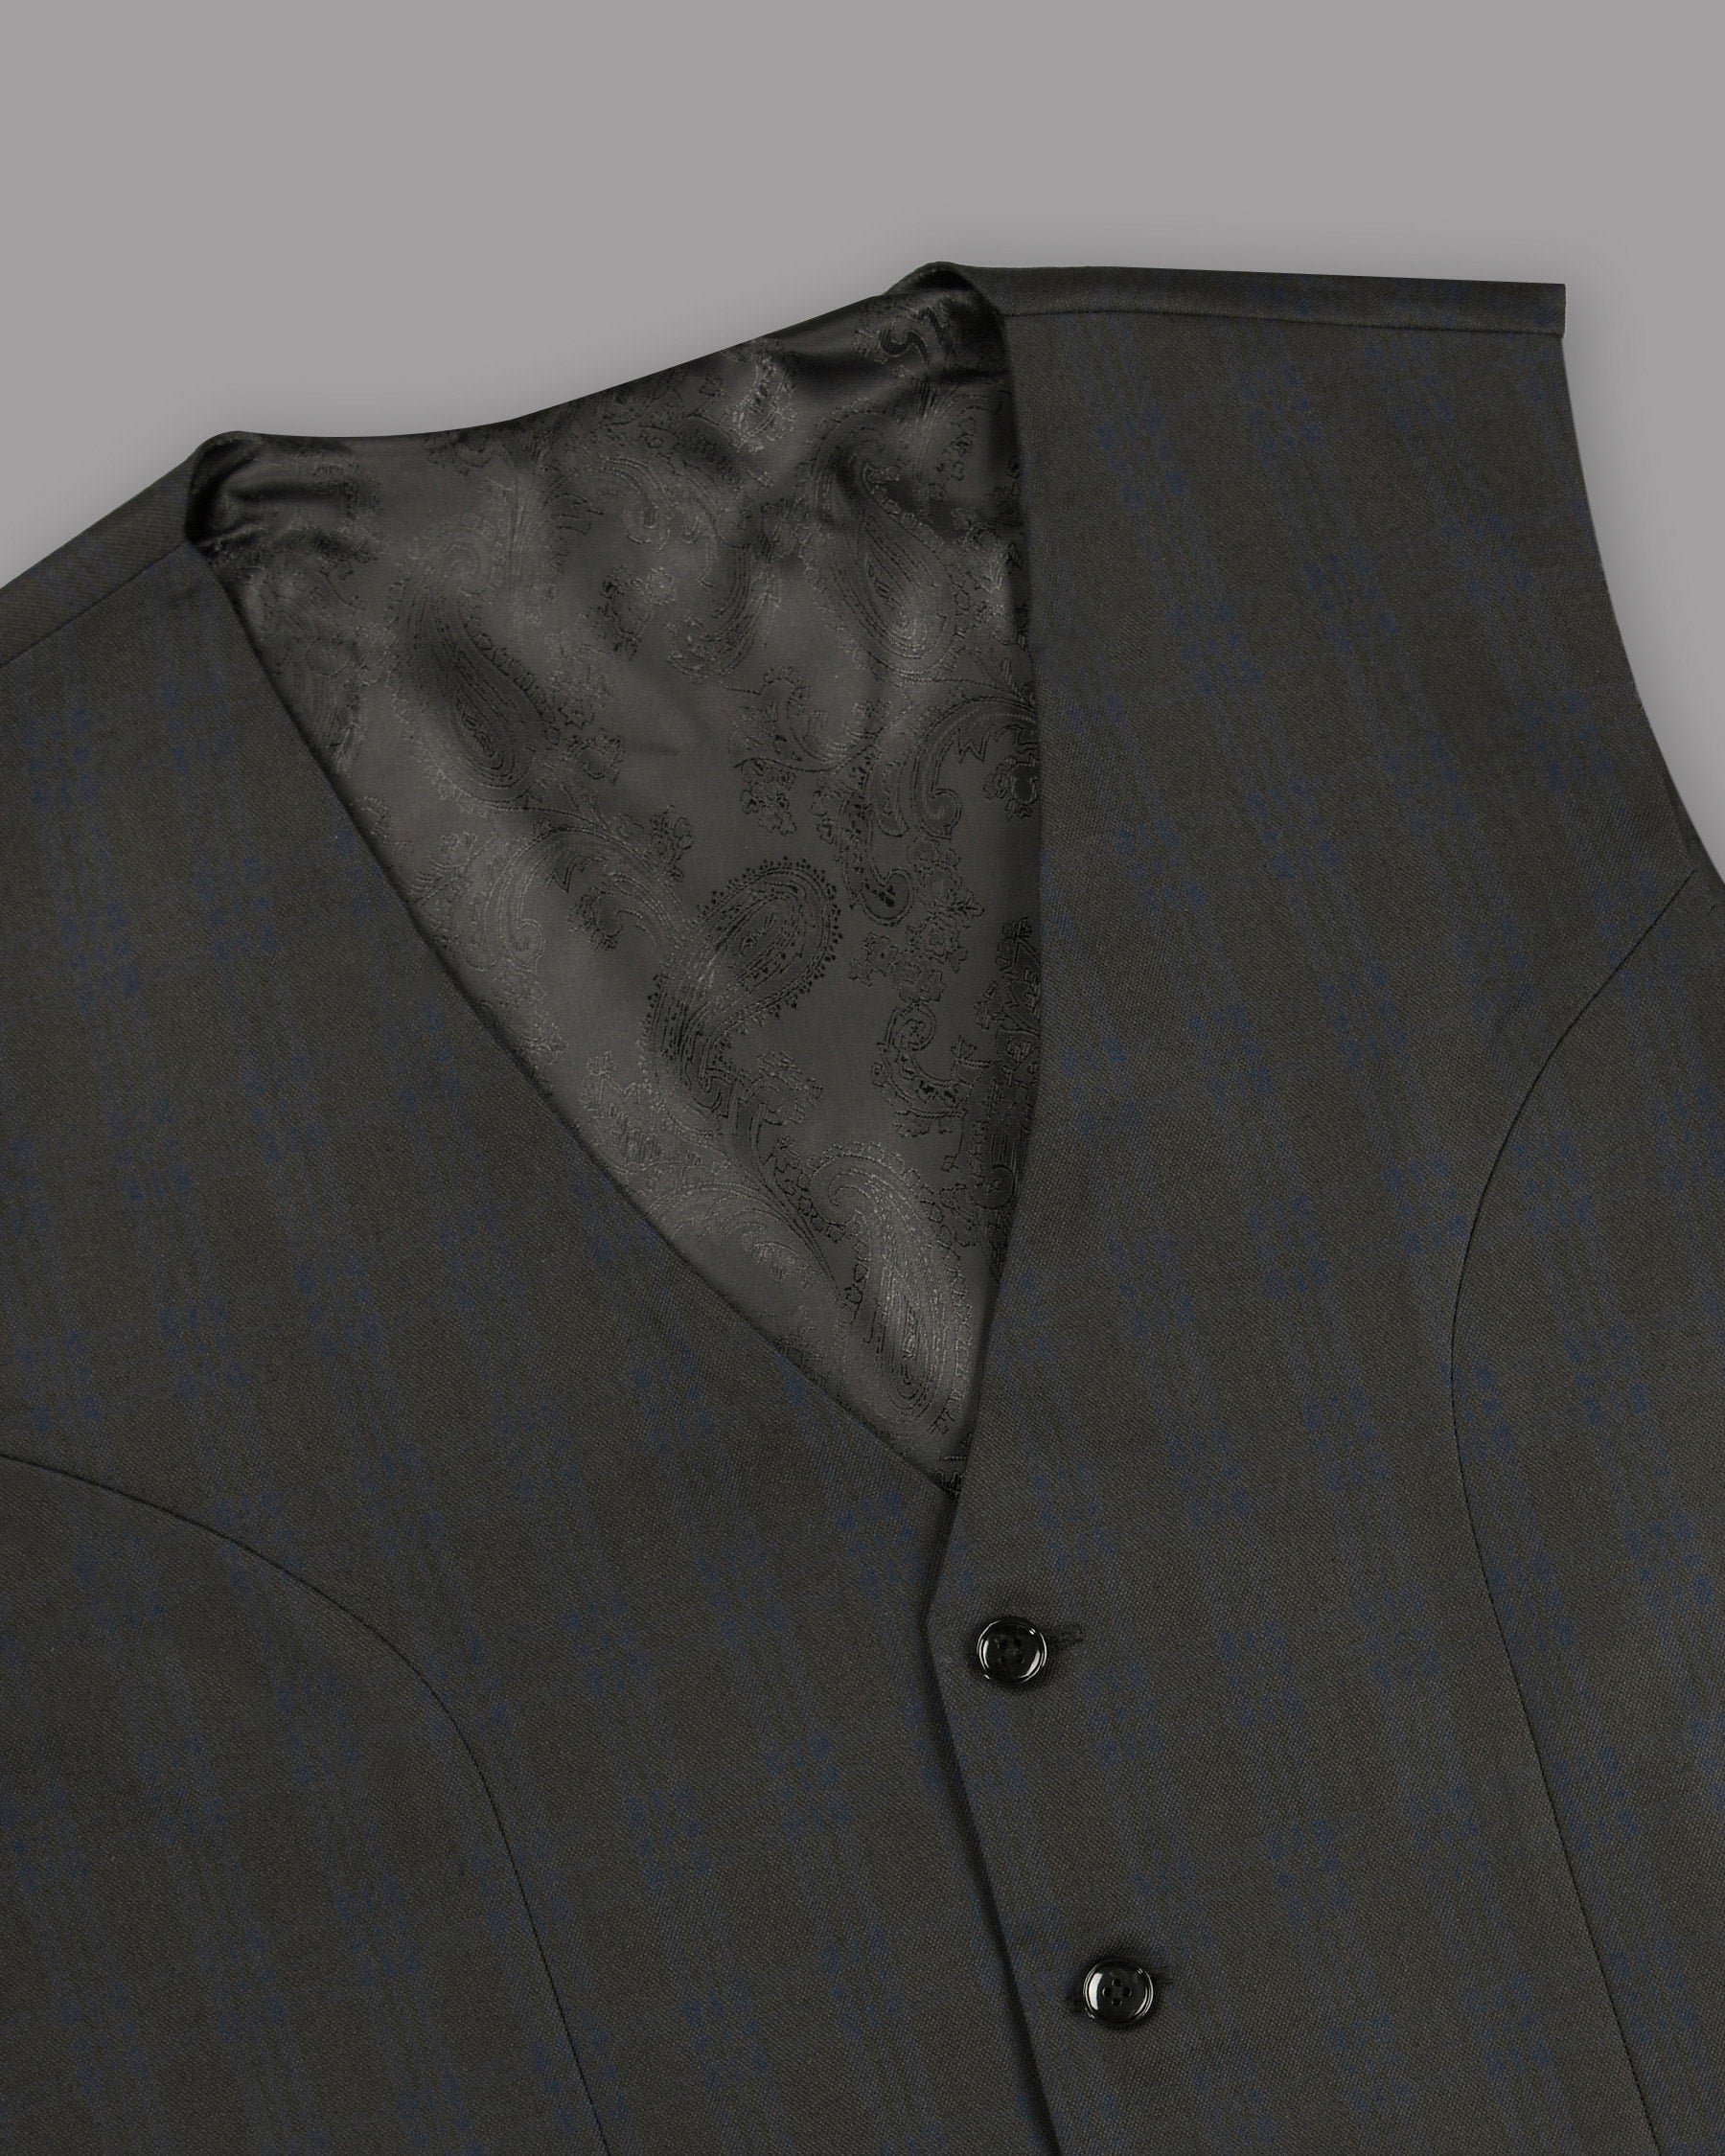 Charcoal with Subtle Navy Plaid Wool Rich Waistcoat V275-40, V275-42, V275-46, V275-50, V275-56, V275-44, V275-52, V275-54, V275-36, V275-38, V275-48, V275-58, V275-60